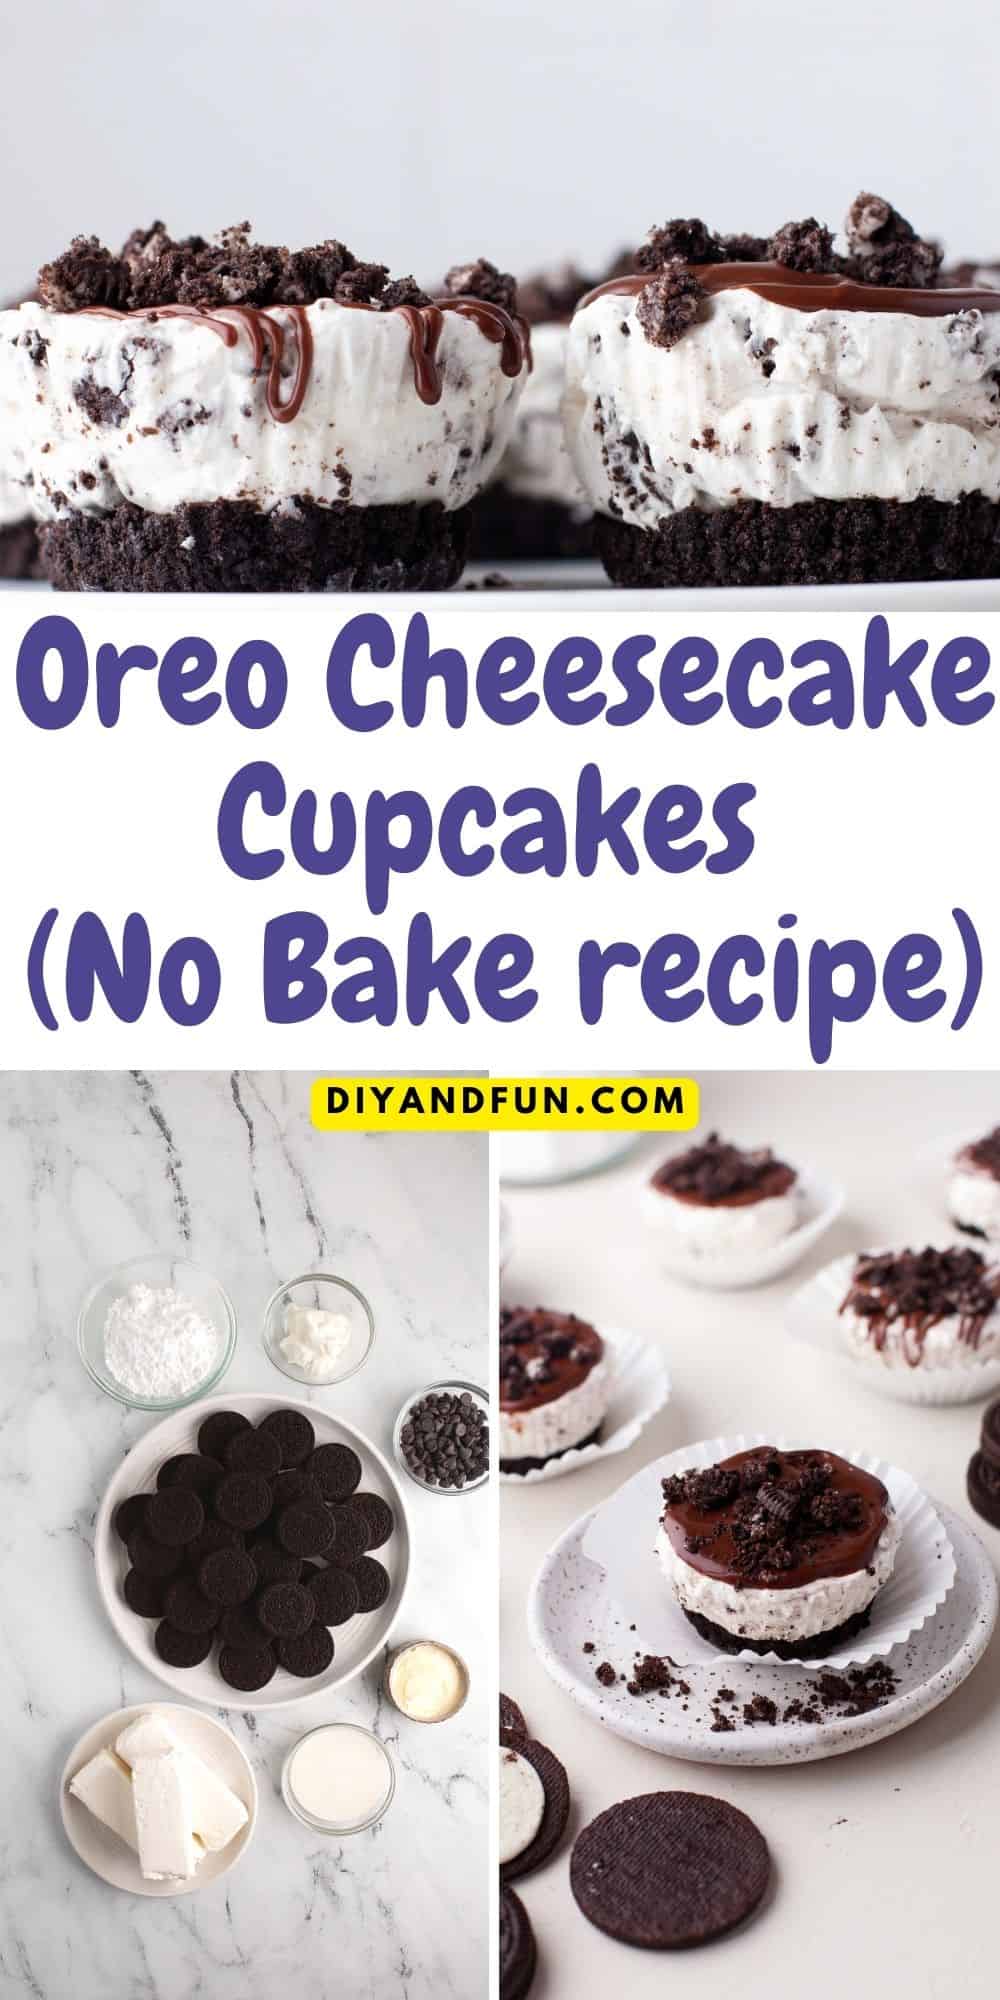 Oreo Cheesecake Cupcakes No Bake, a simple and delicious three layer dessert made with a cookie crust and creamy cheesecake filling.